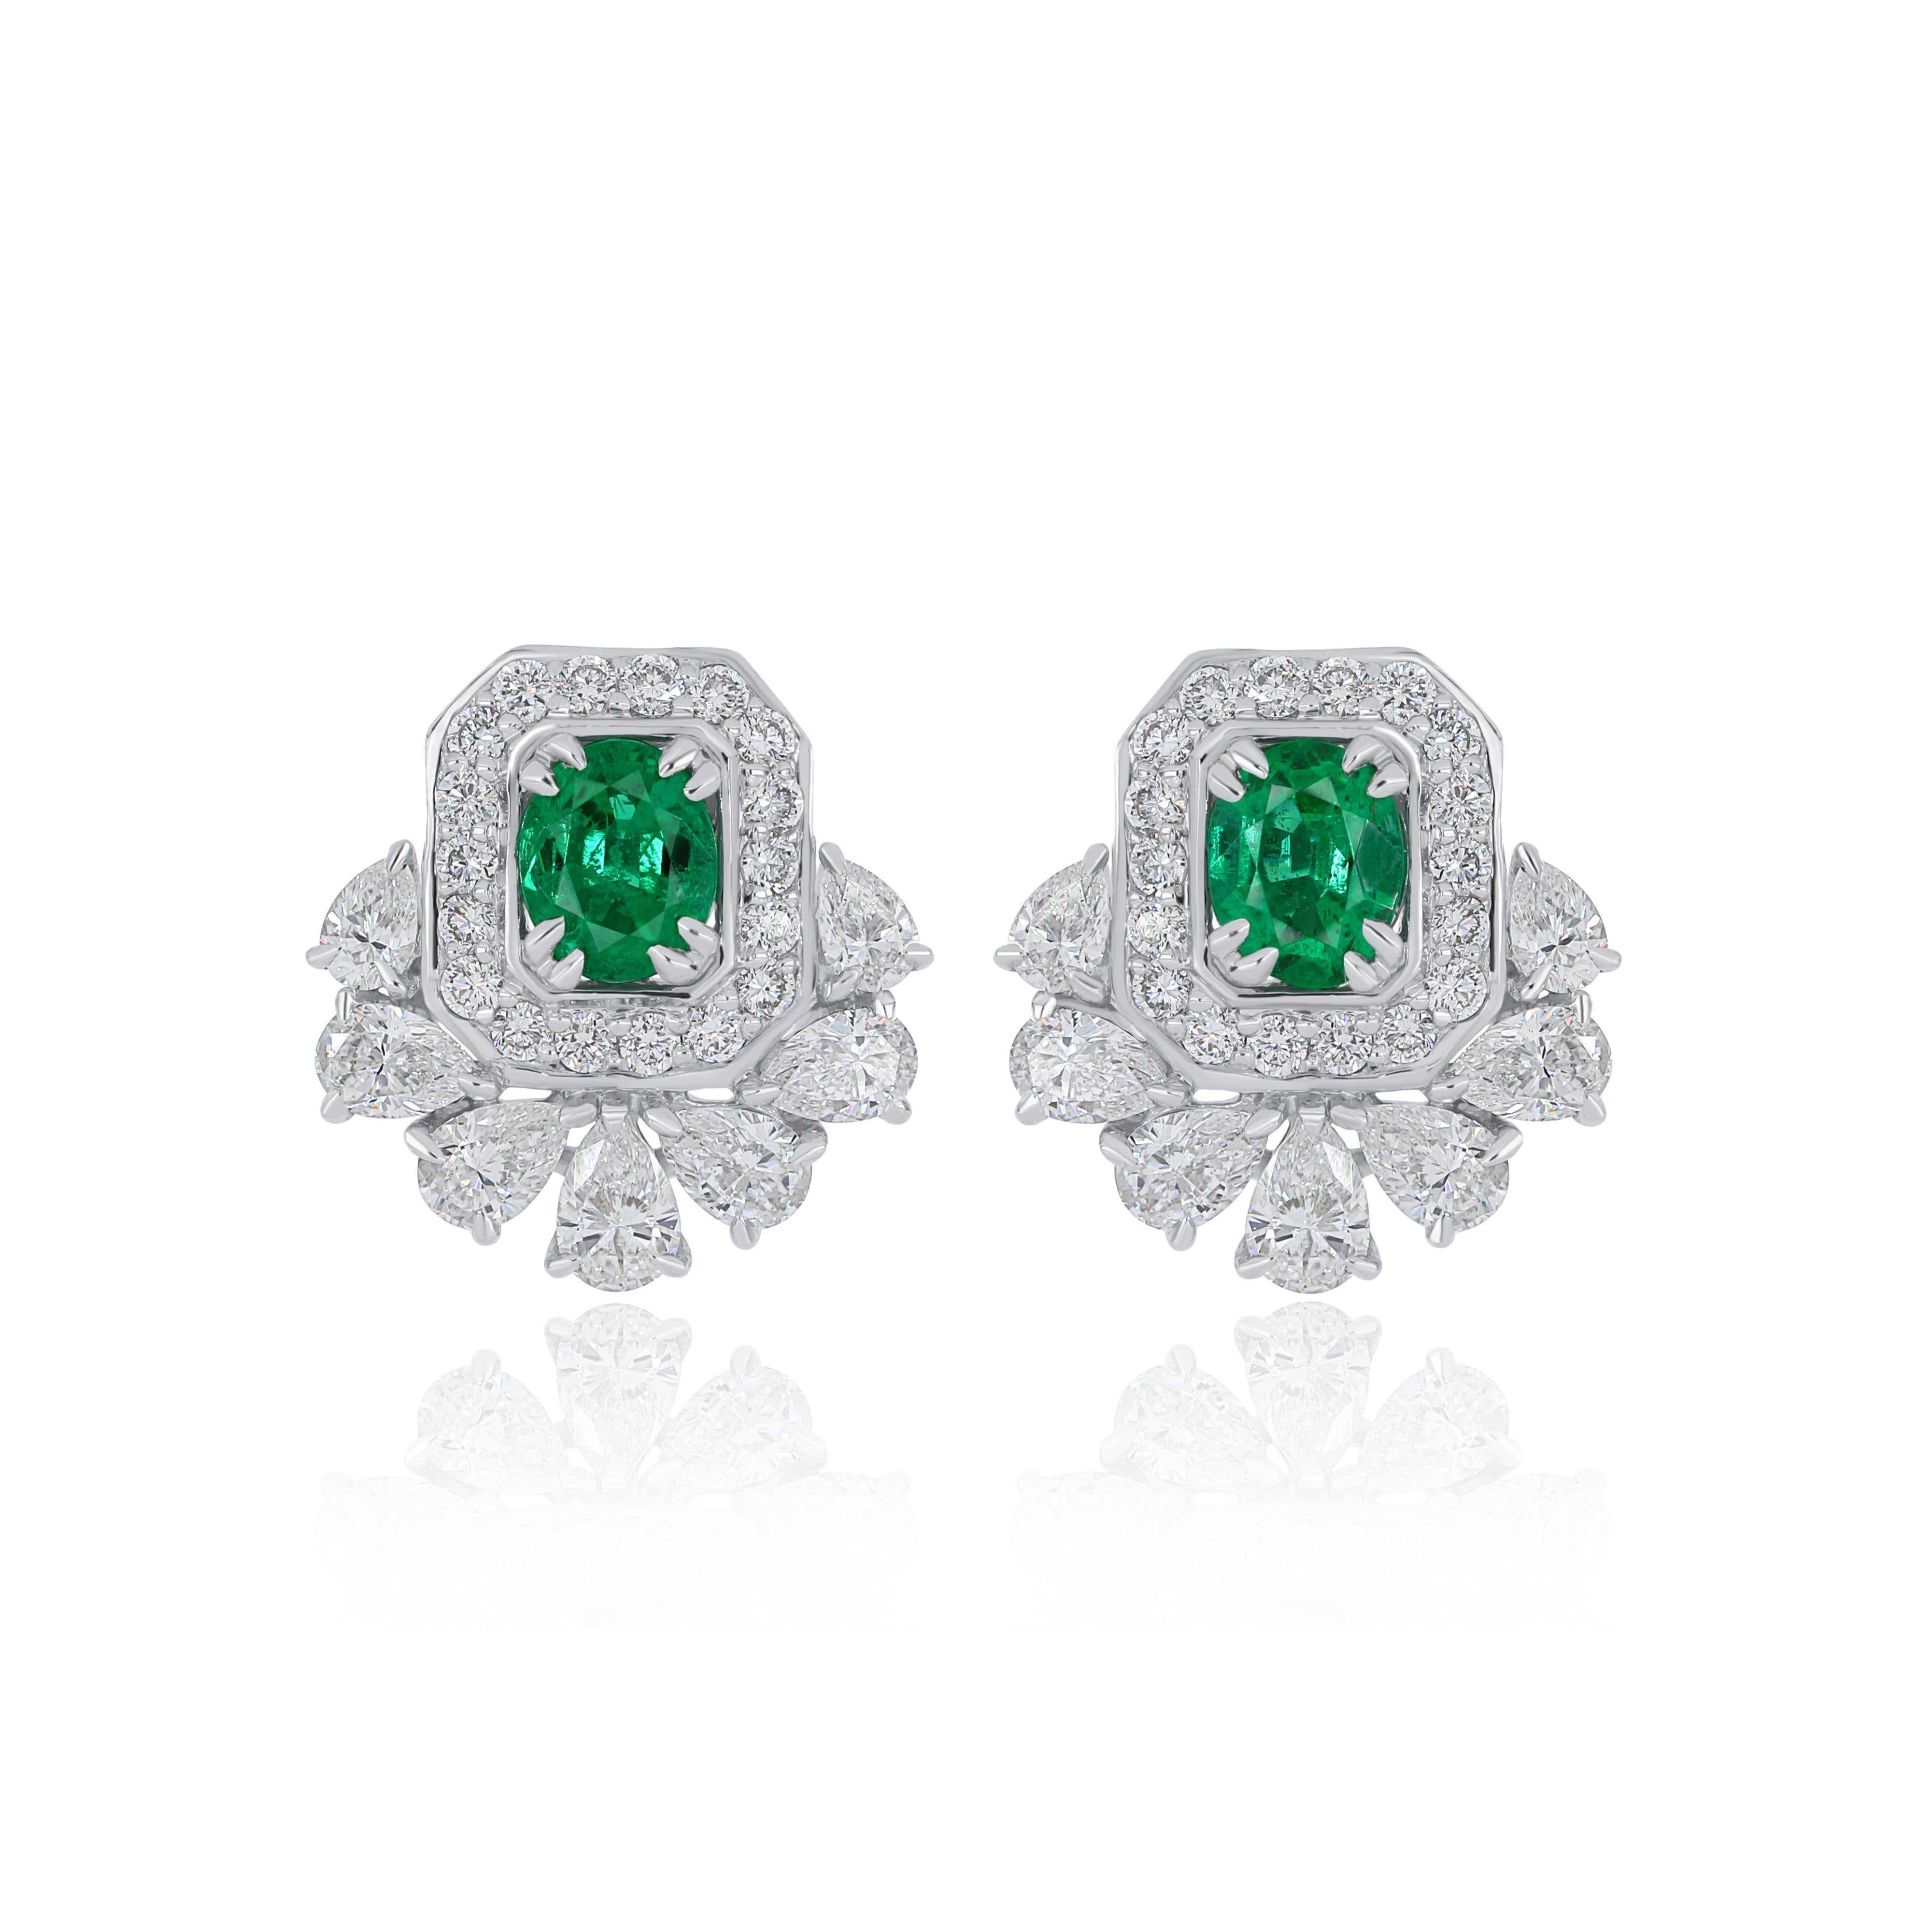 Emerald and Diamond Studded Earrings in 18 Karat White Gold Handcraft Jewelry For Sale